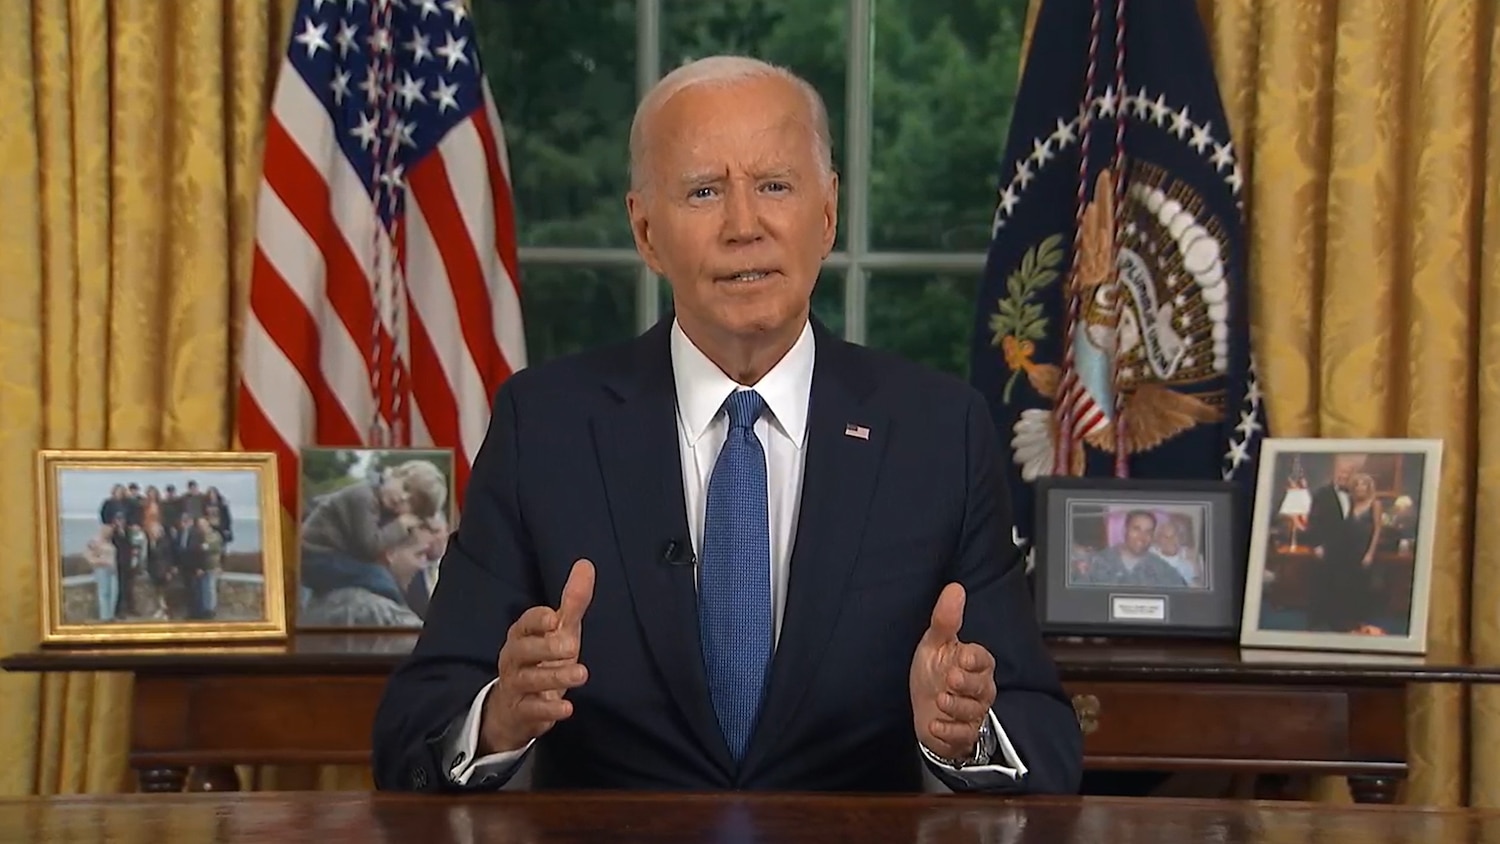 Biden on decision to exit race: 'I revere this office but I love my country more'